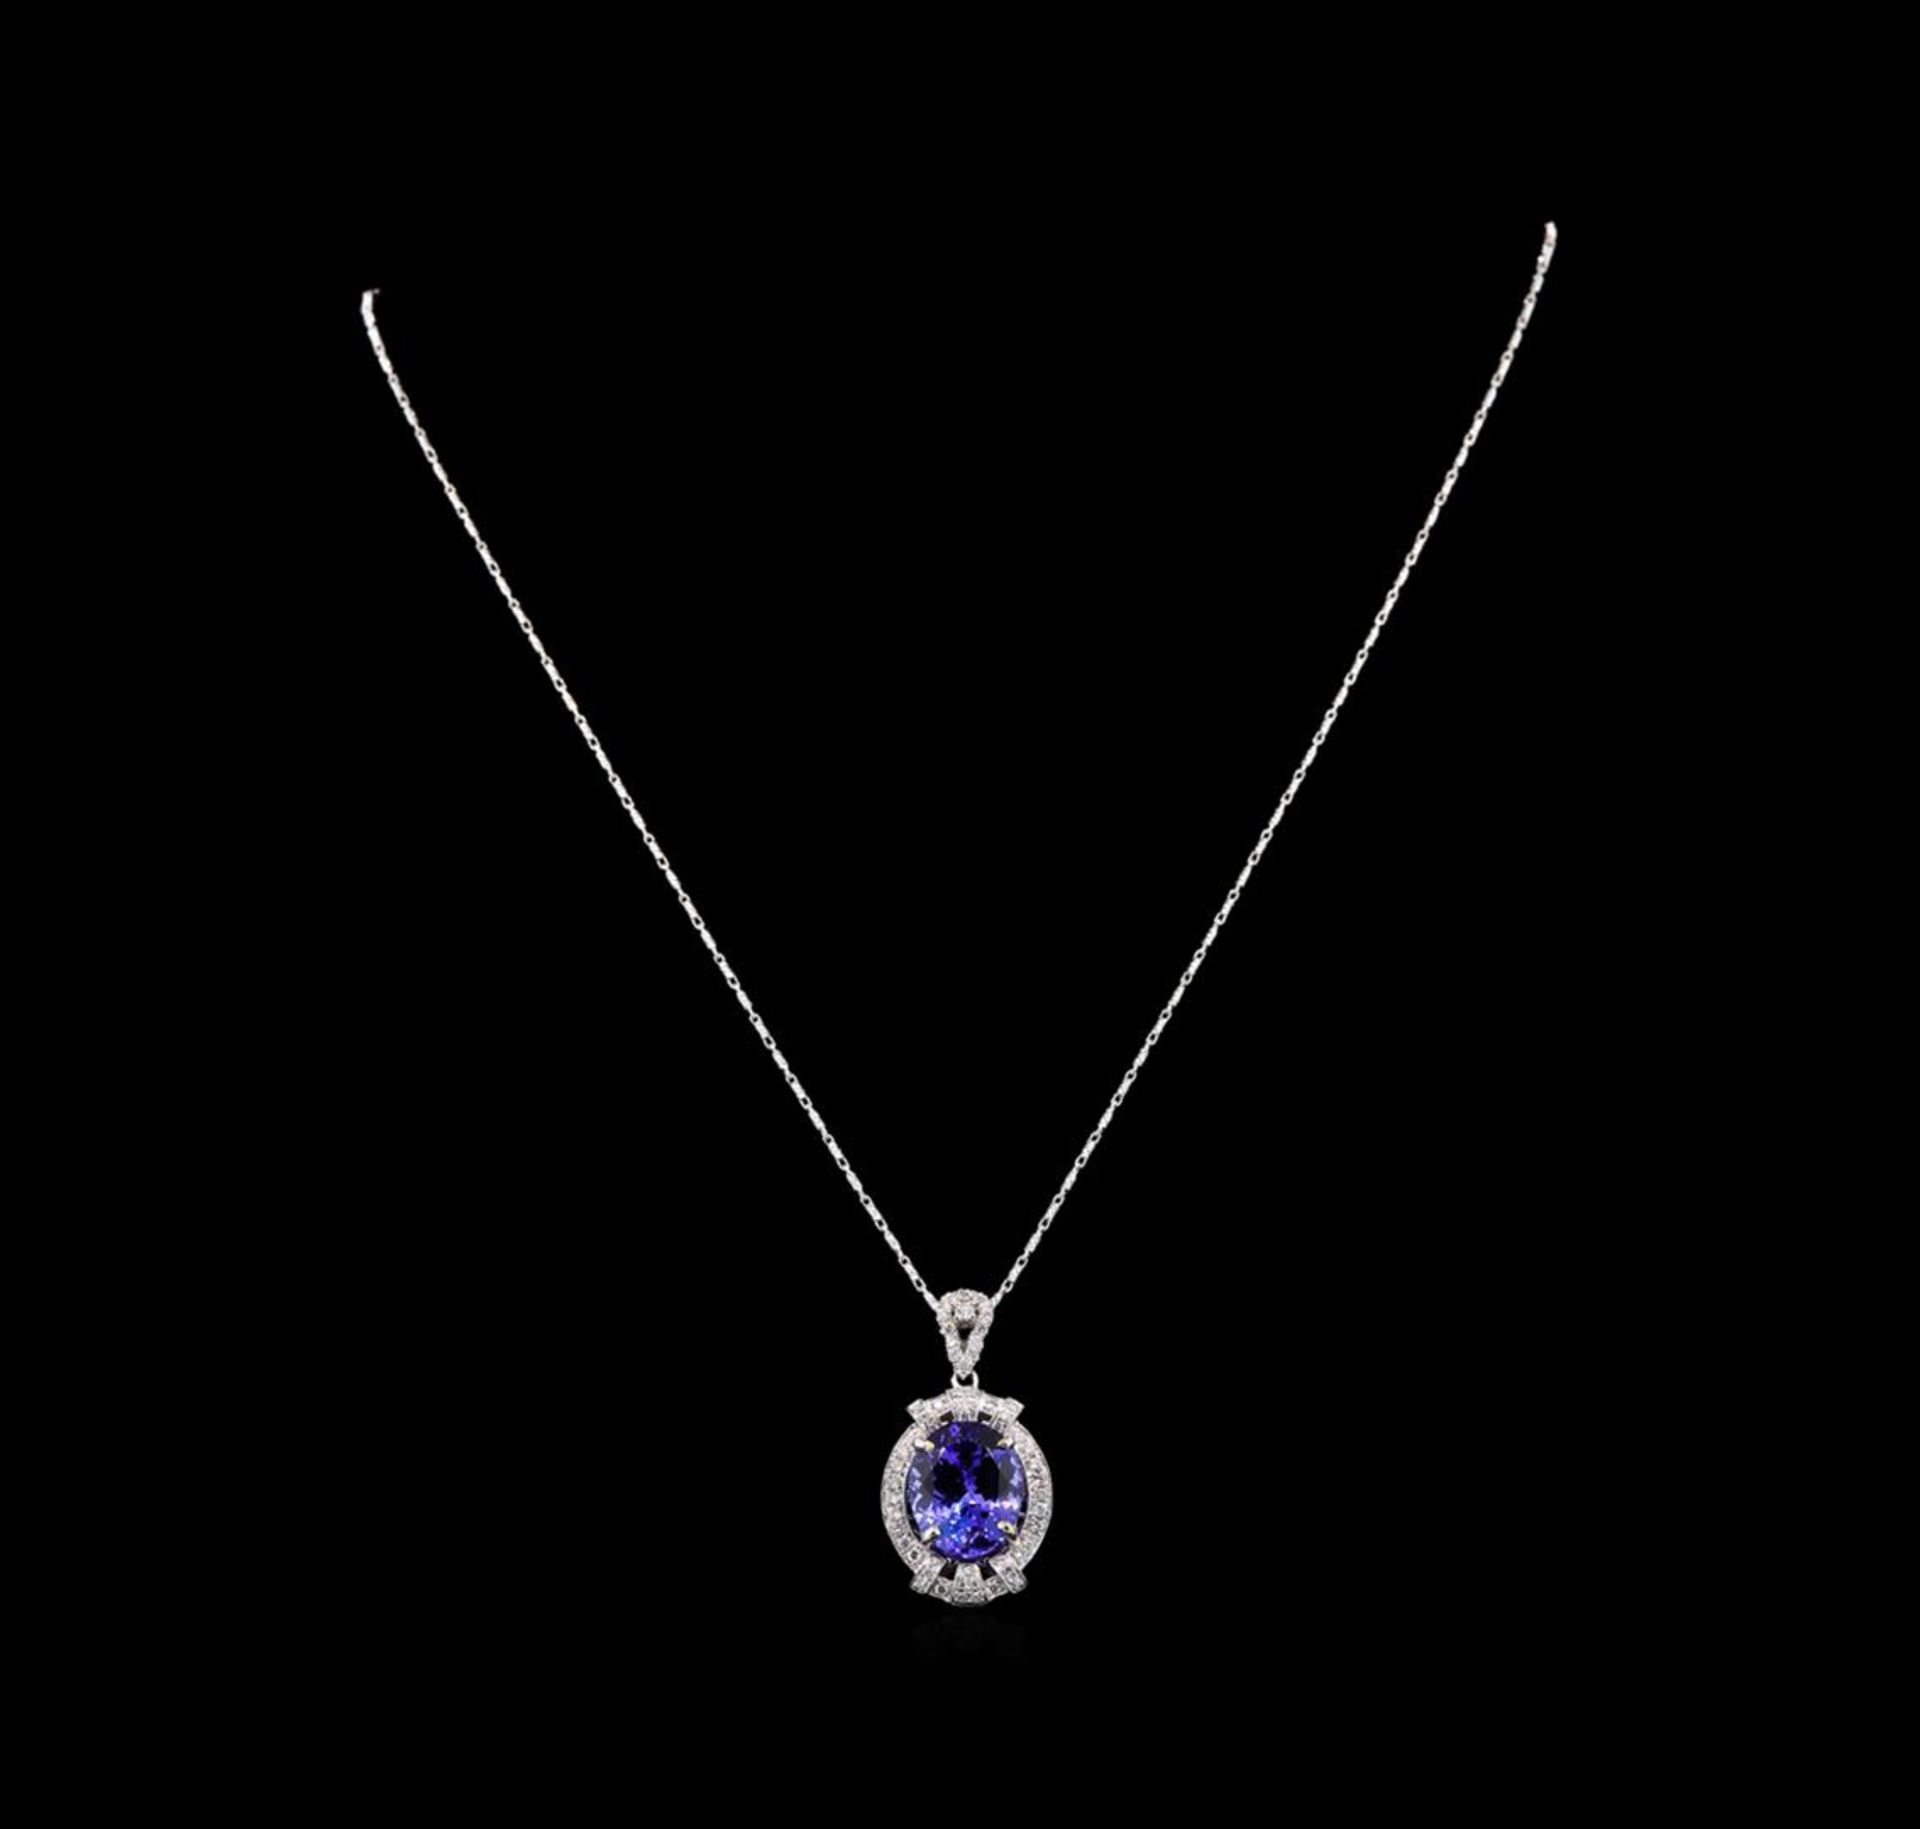 18KT White Gold 6.20 ctw Tanzanite and Diamond Pendant With Chain - Image 3 of 8